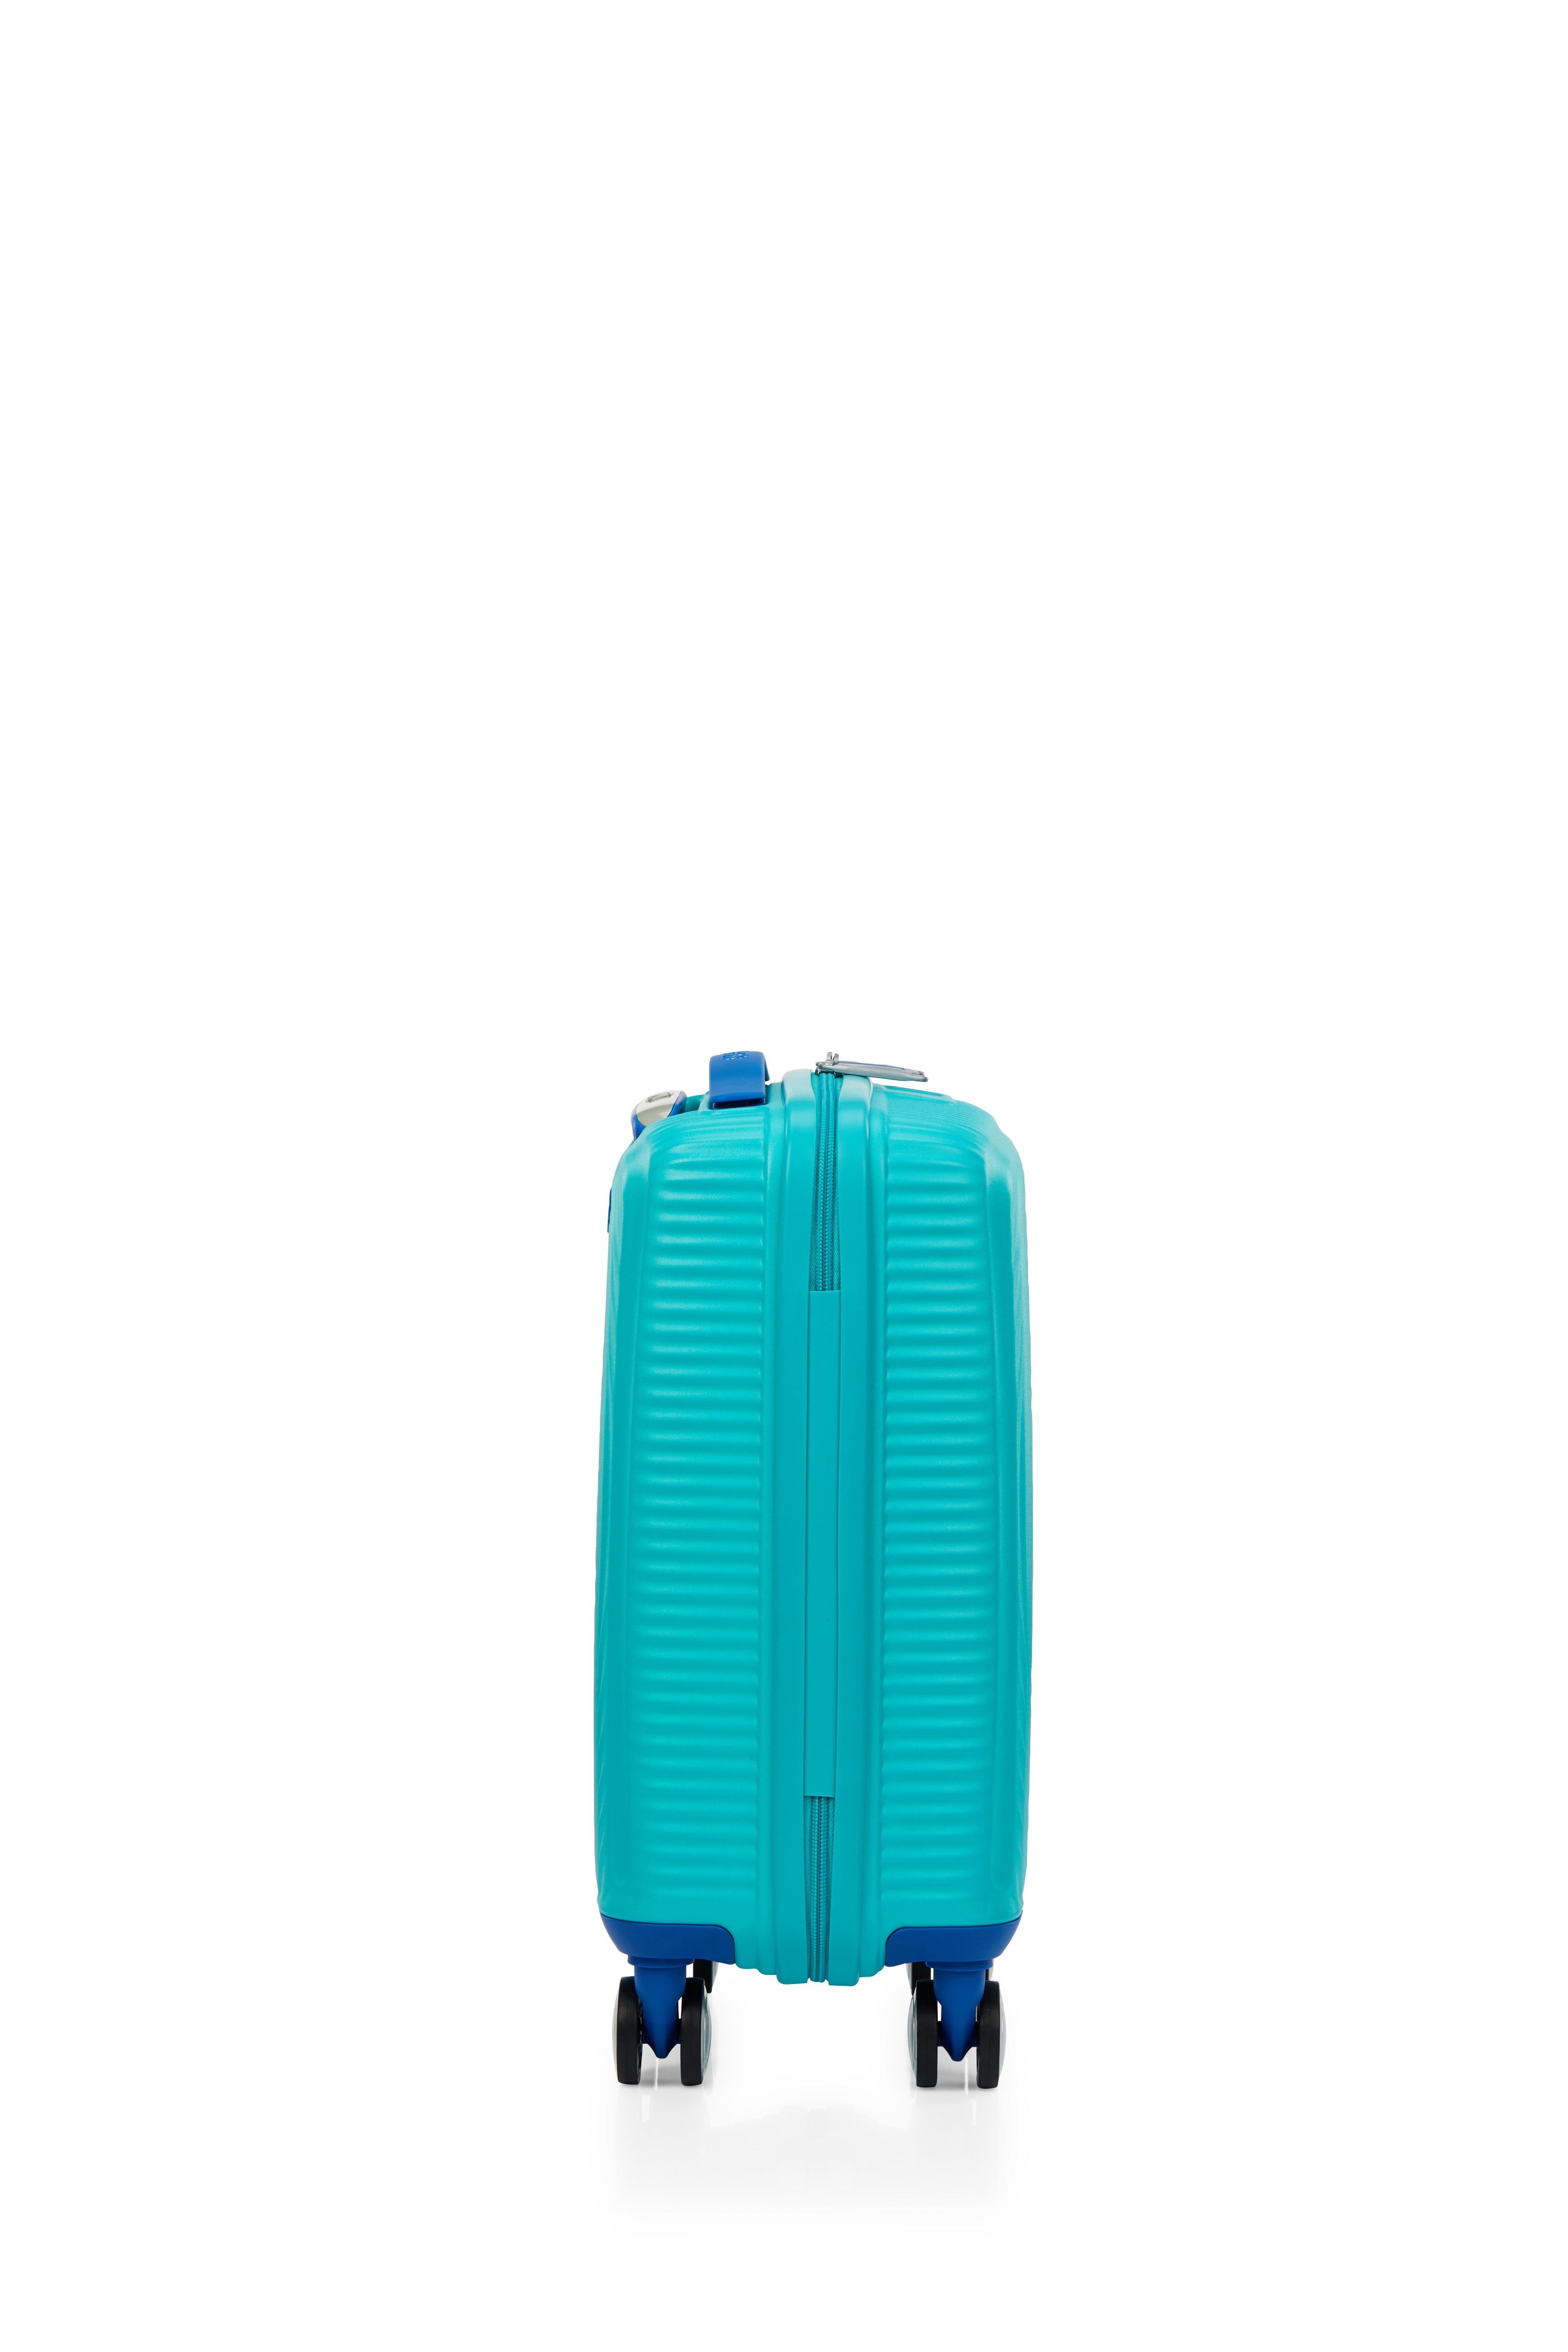 American Tourister - Little Curio 47cm Spinner - Teal/Blue-5